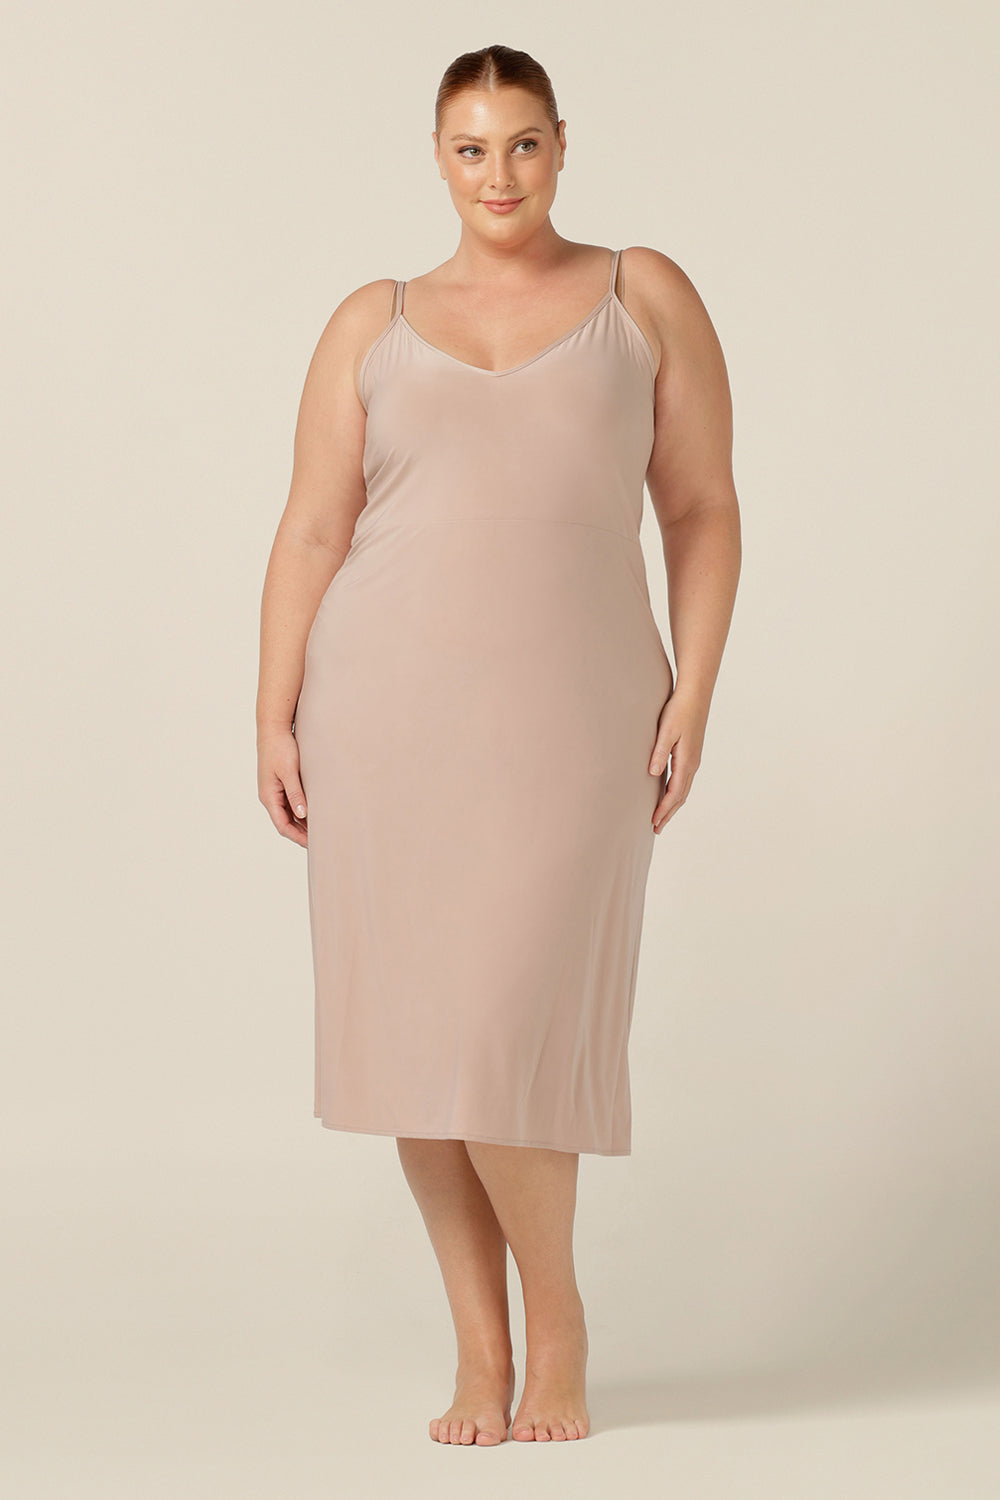 A fuller figure woman wears a midi-length, reversible slip in nude slinky stretch jersey. Worn with a V neck to the front, this slip can flip to show a scoop neck. With a skirt length finishing below the knee, this neutral midi slip gives a smooth layer under dresses and skirts.